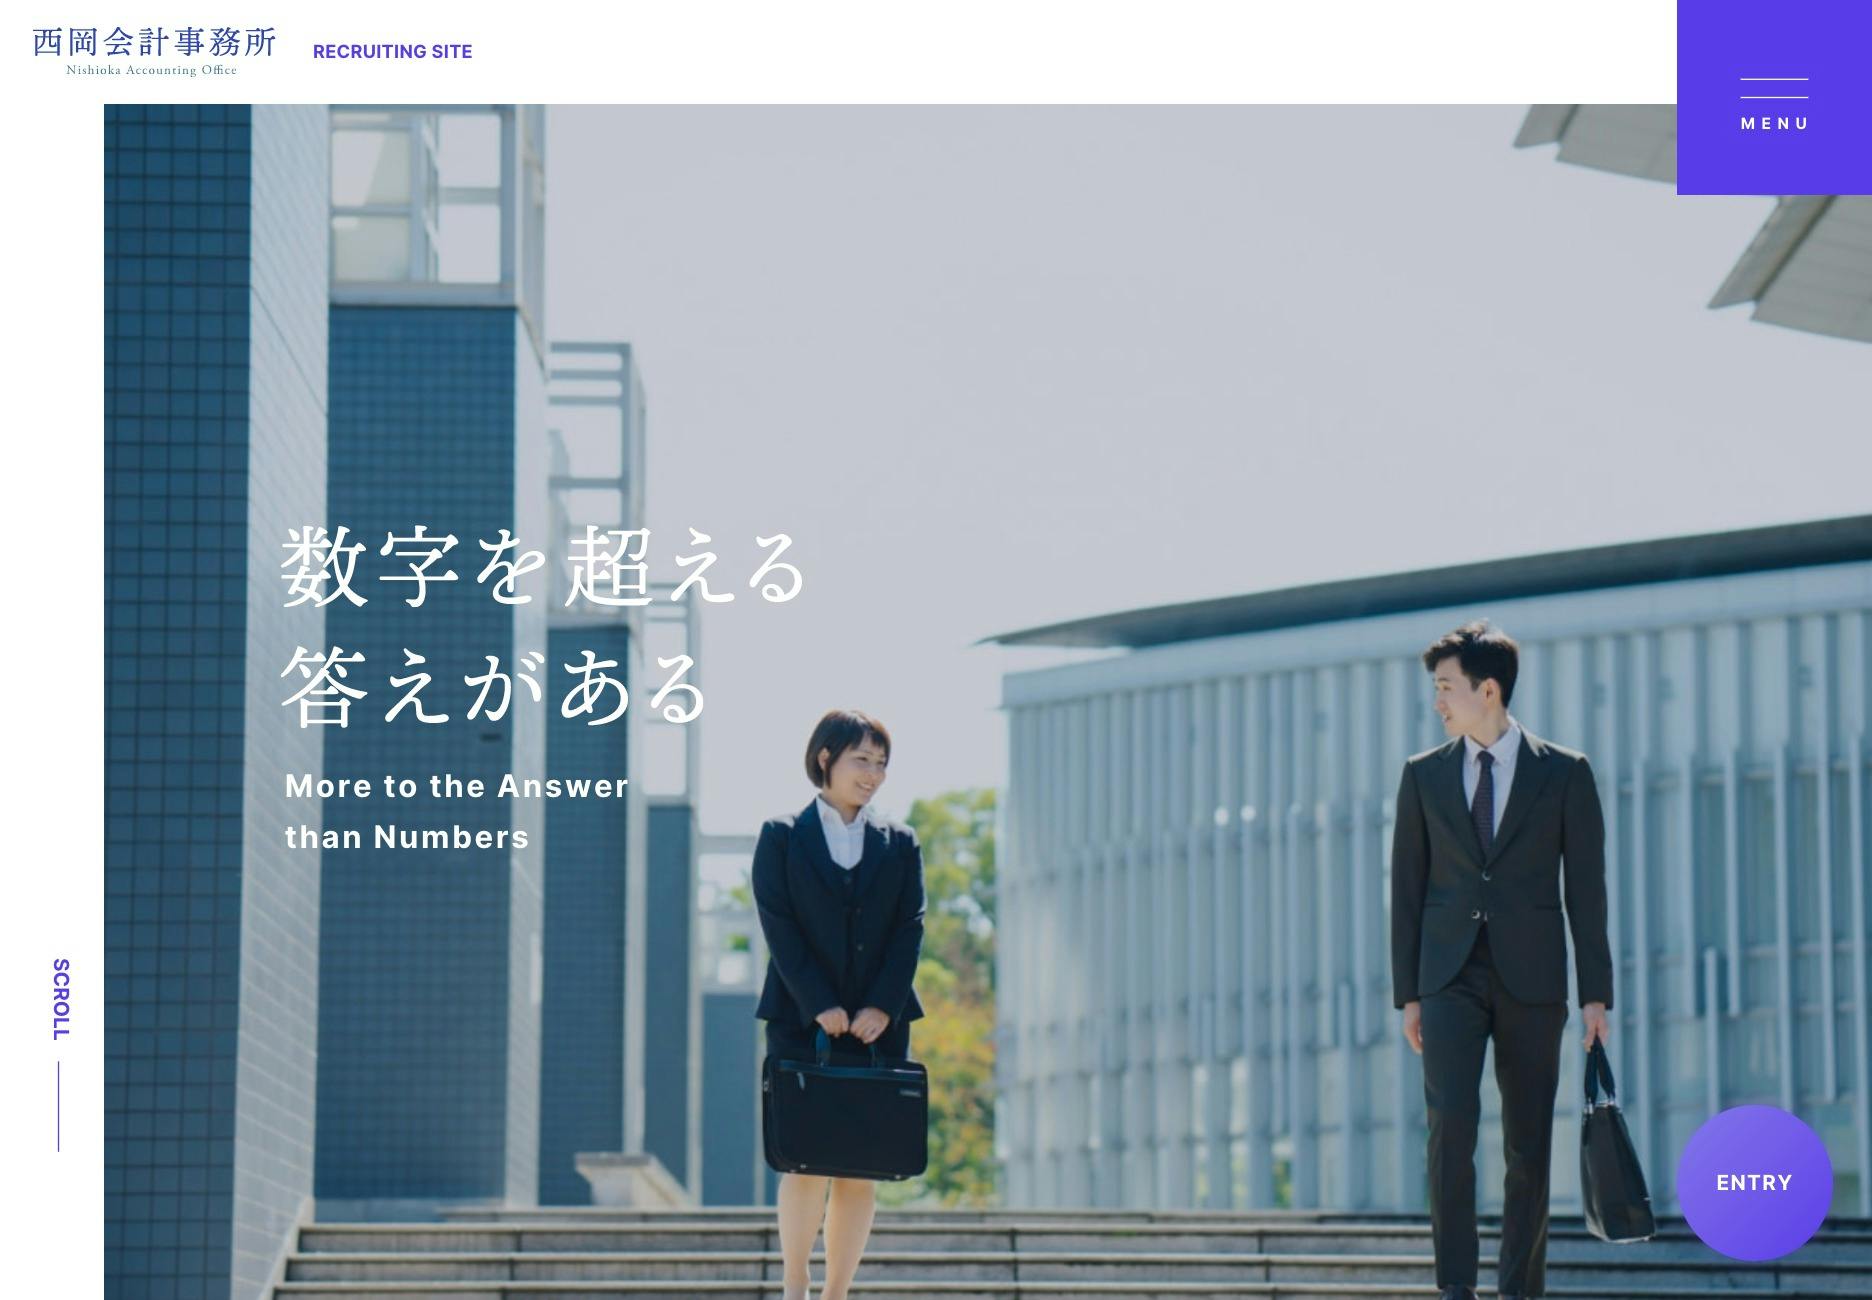 Cover Image for 西岡会計事務所 採用サイト｜和歌山県の会計事務所